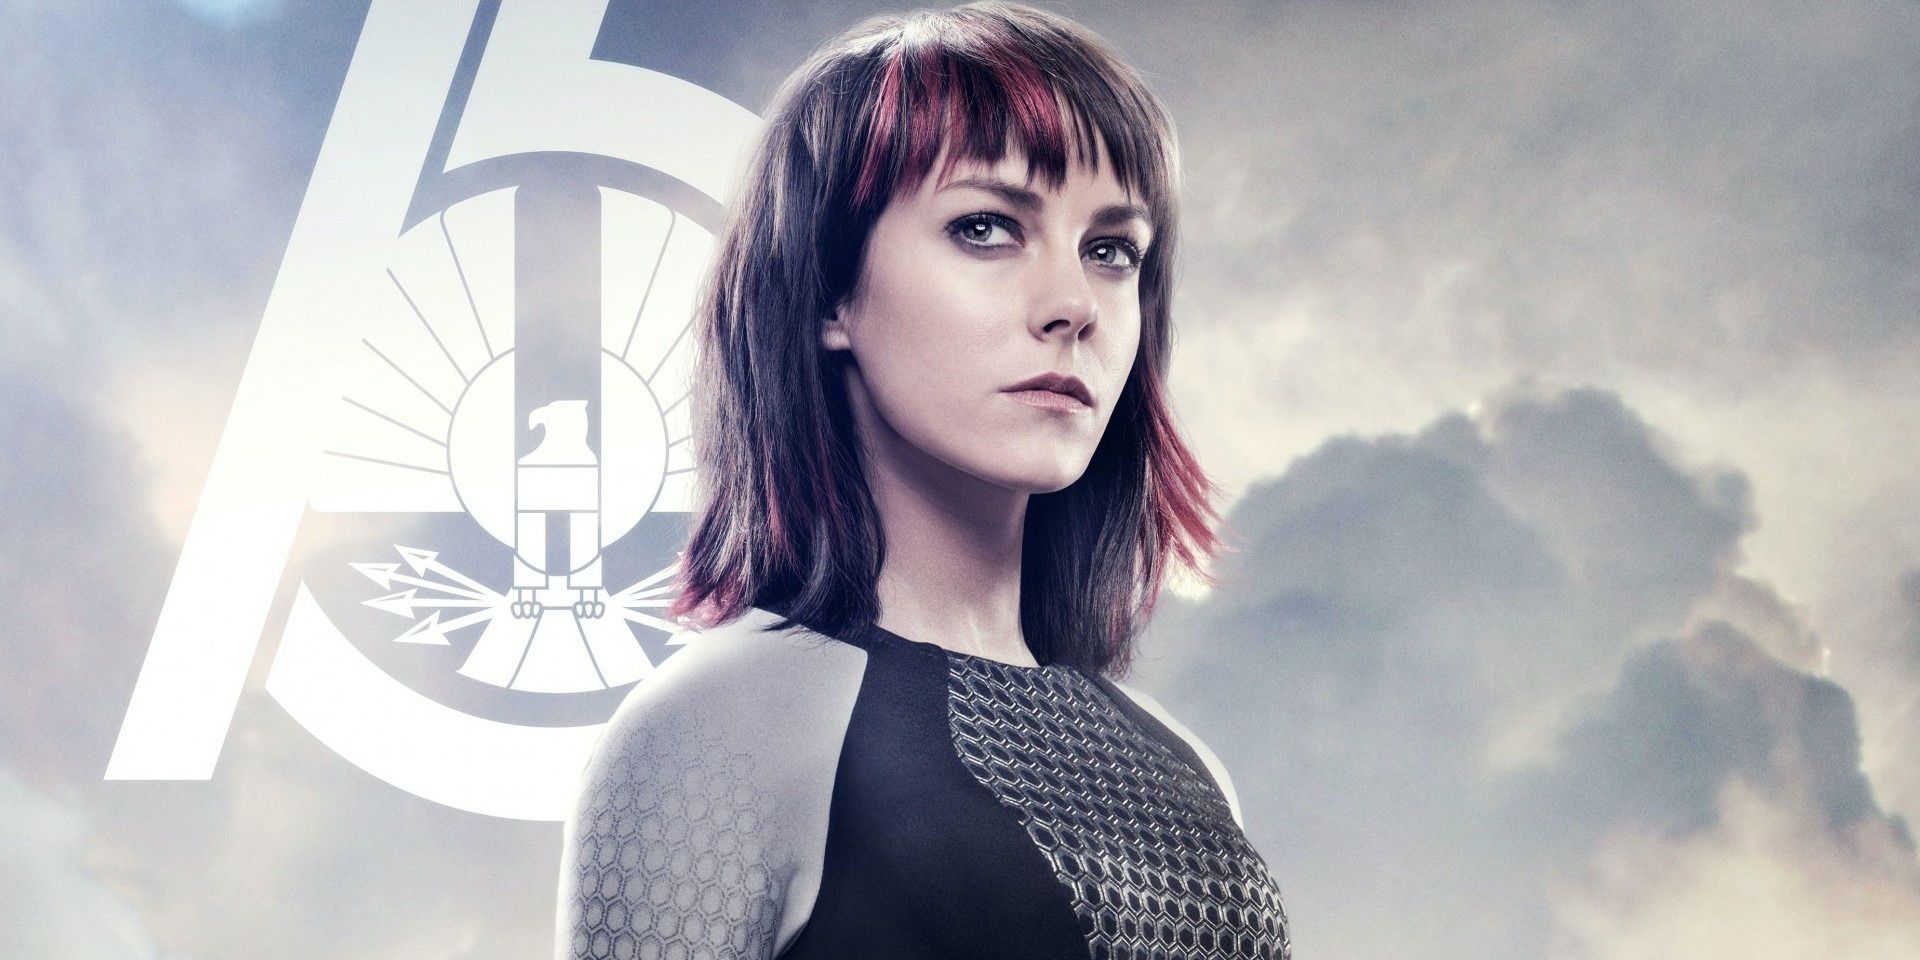 Johanna Mason wearing her tribute uniform and standing in front of the number 75.